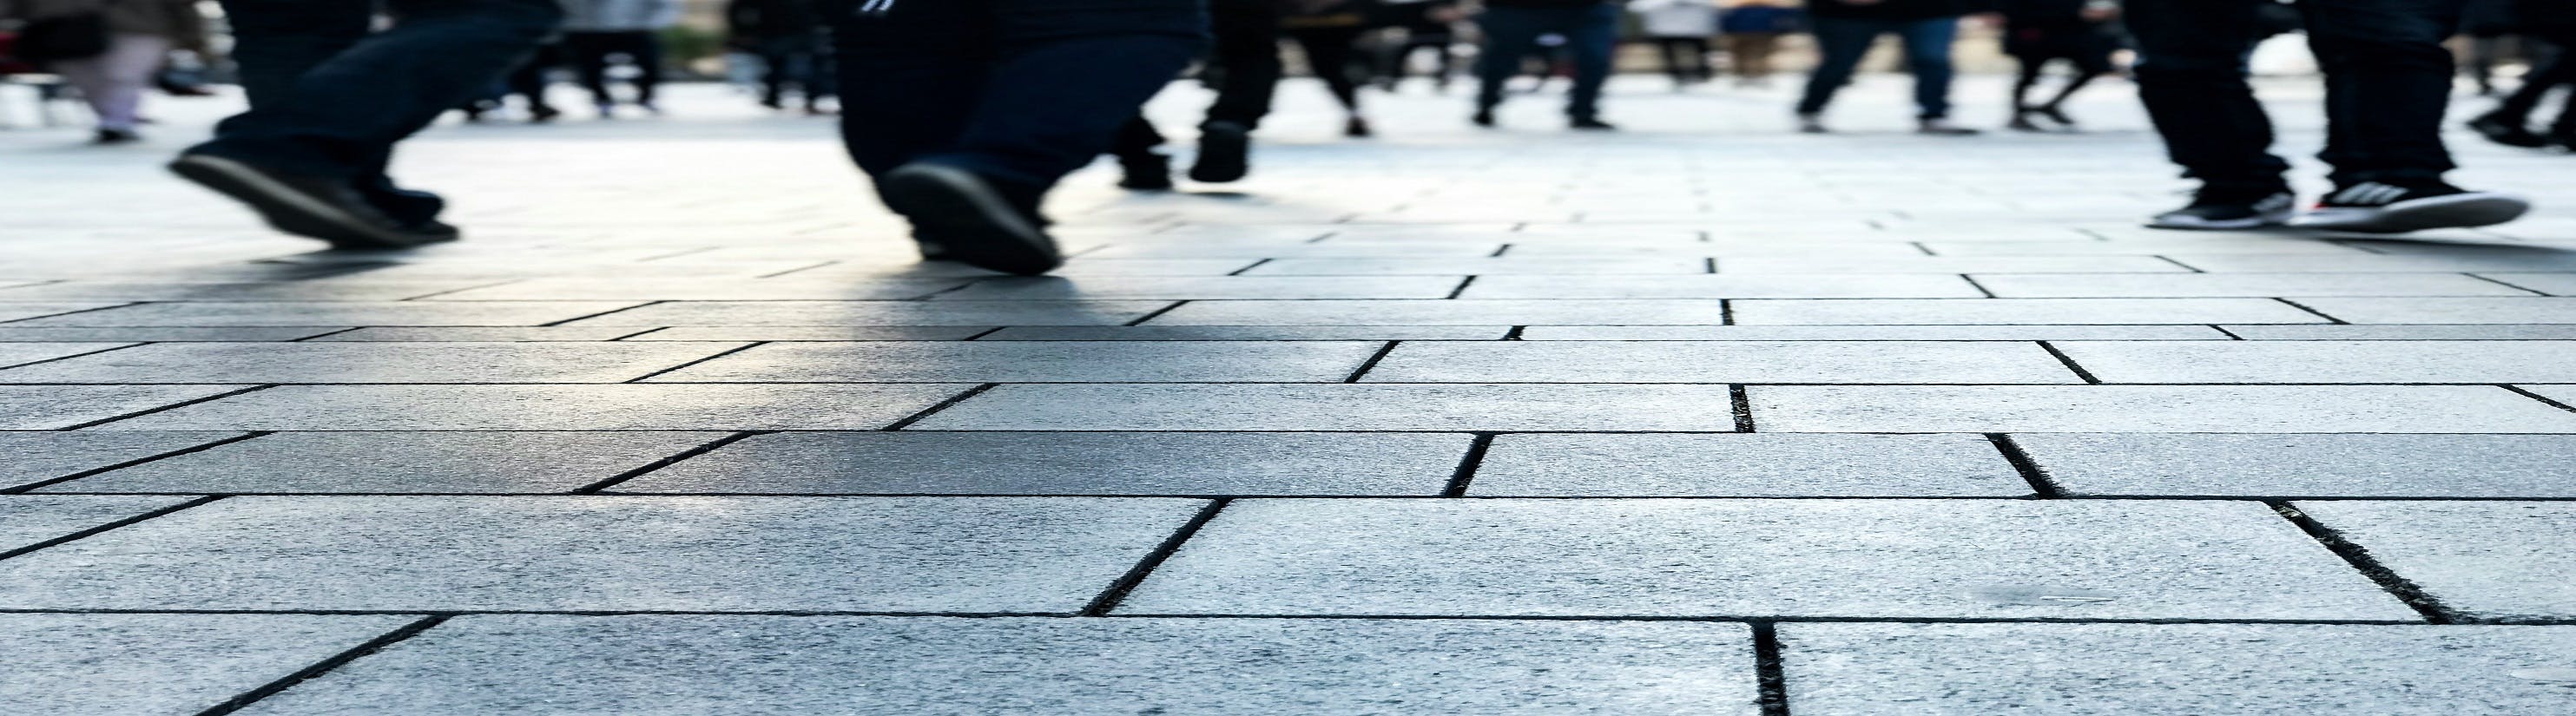 Photo of people walking on paved surface.